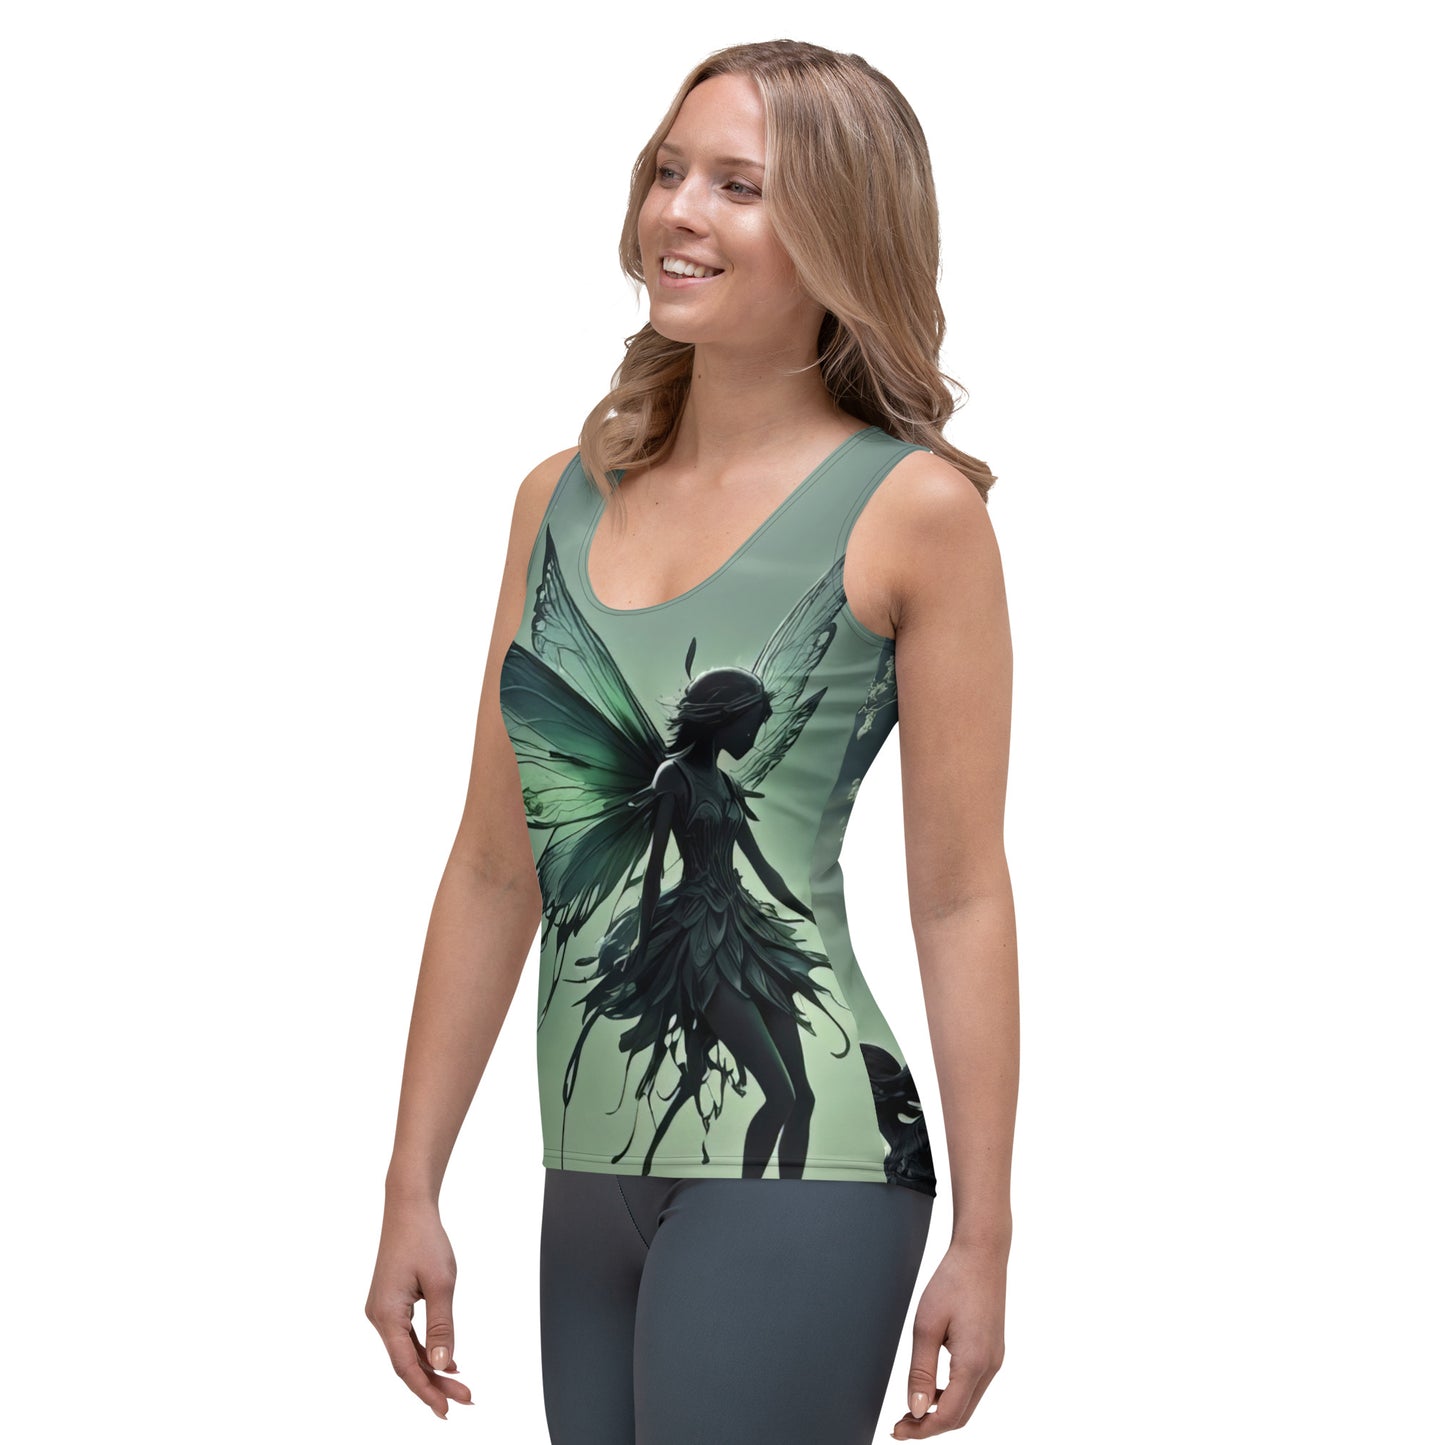 Misty Meadows - Fairy Forest Tank-top v1 - Print All Over